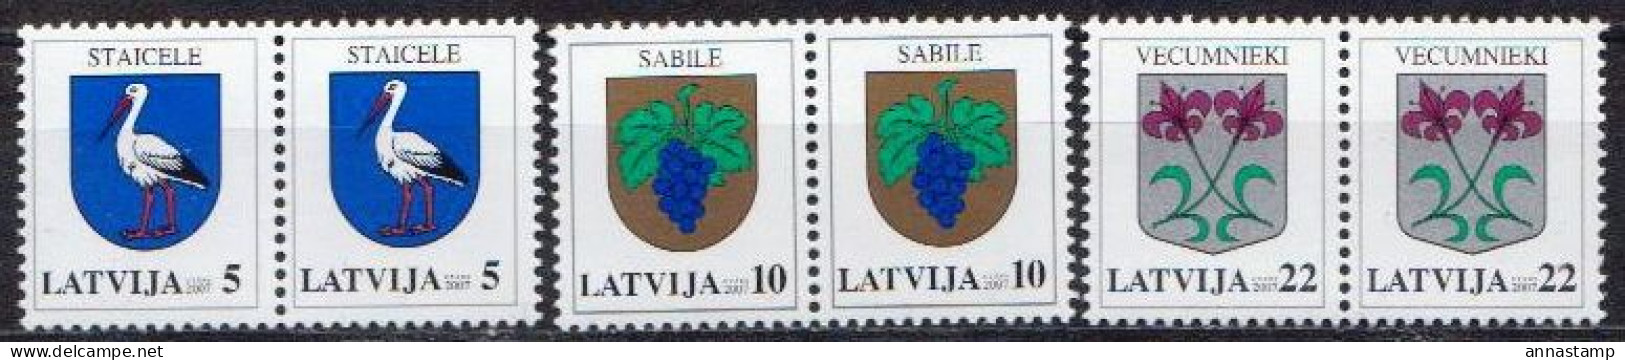 Latvia MNH Set In Pairs - Stamps